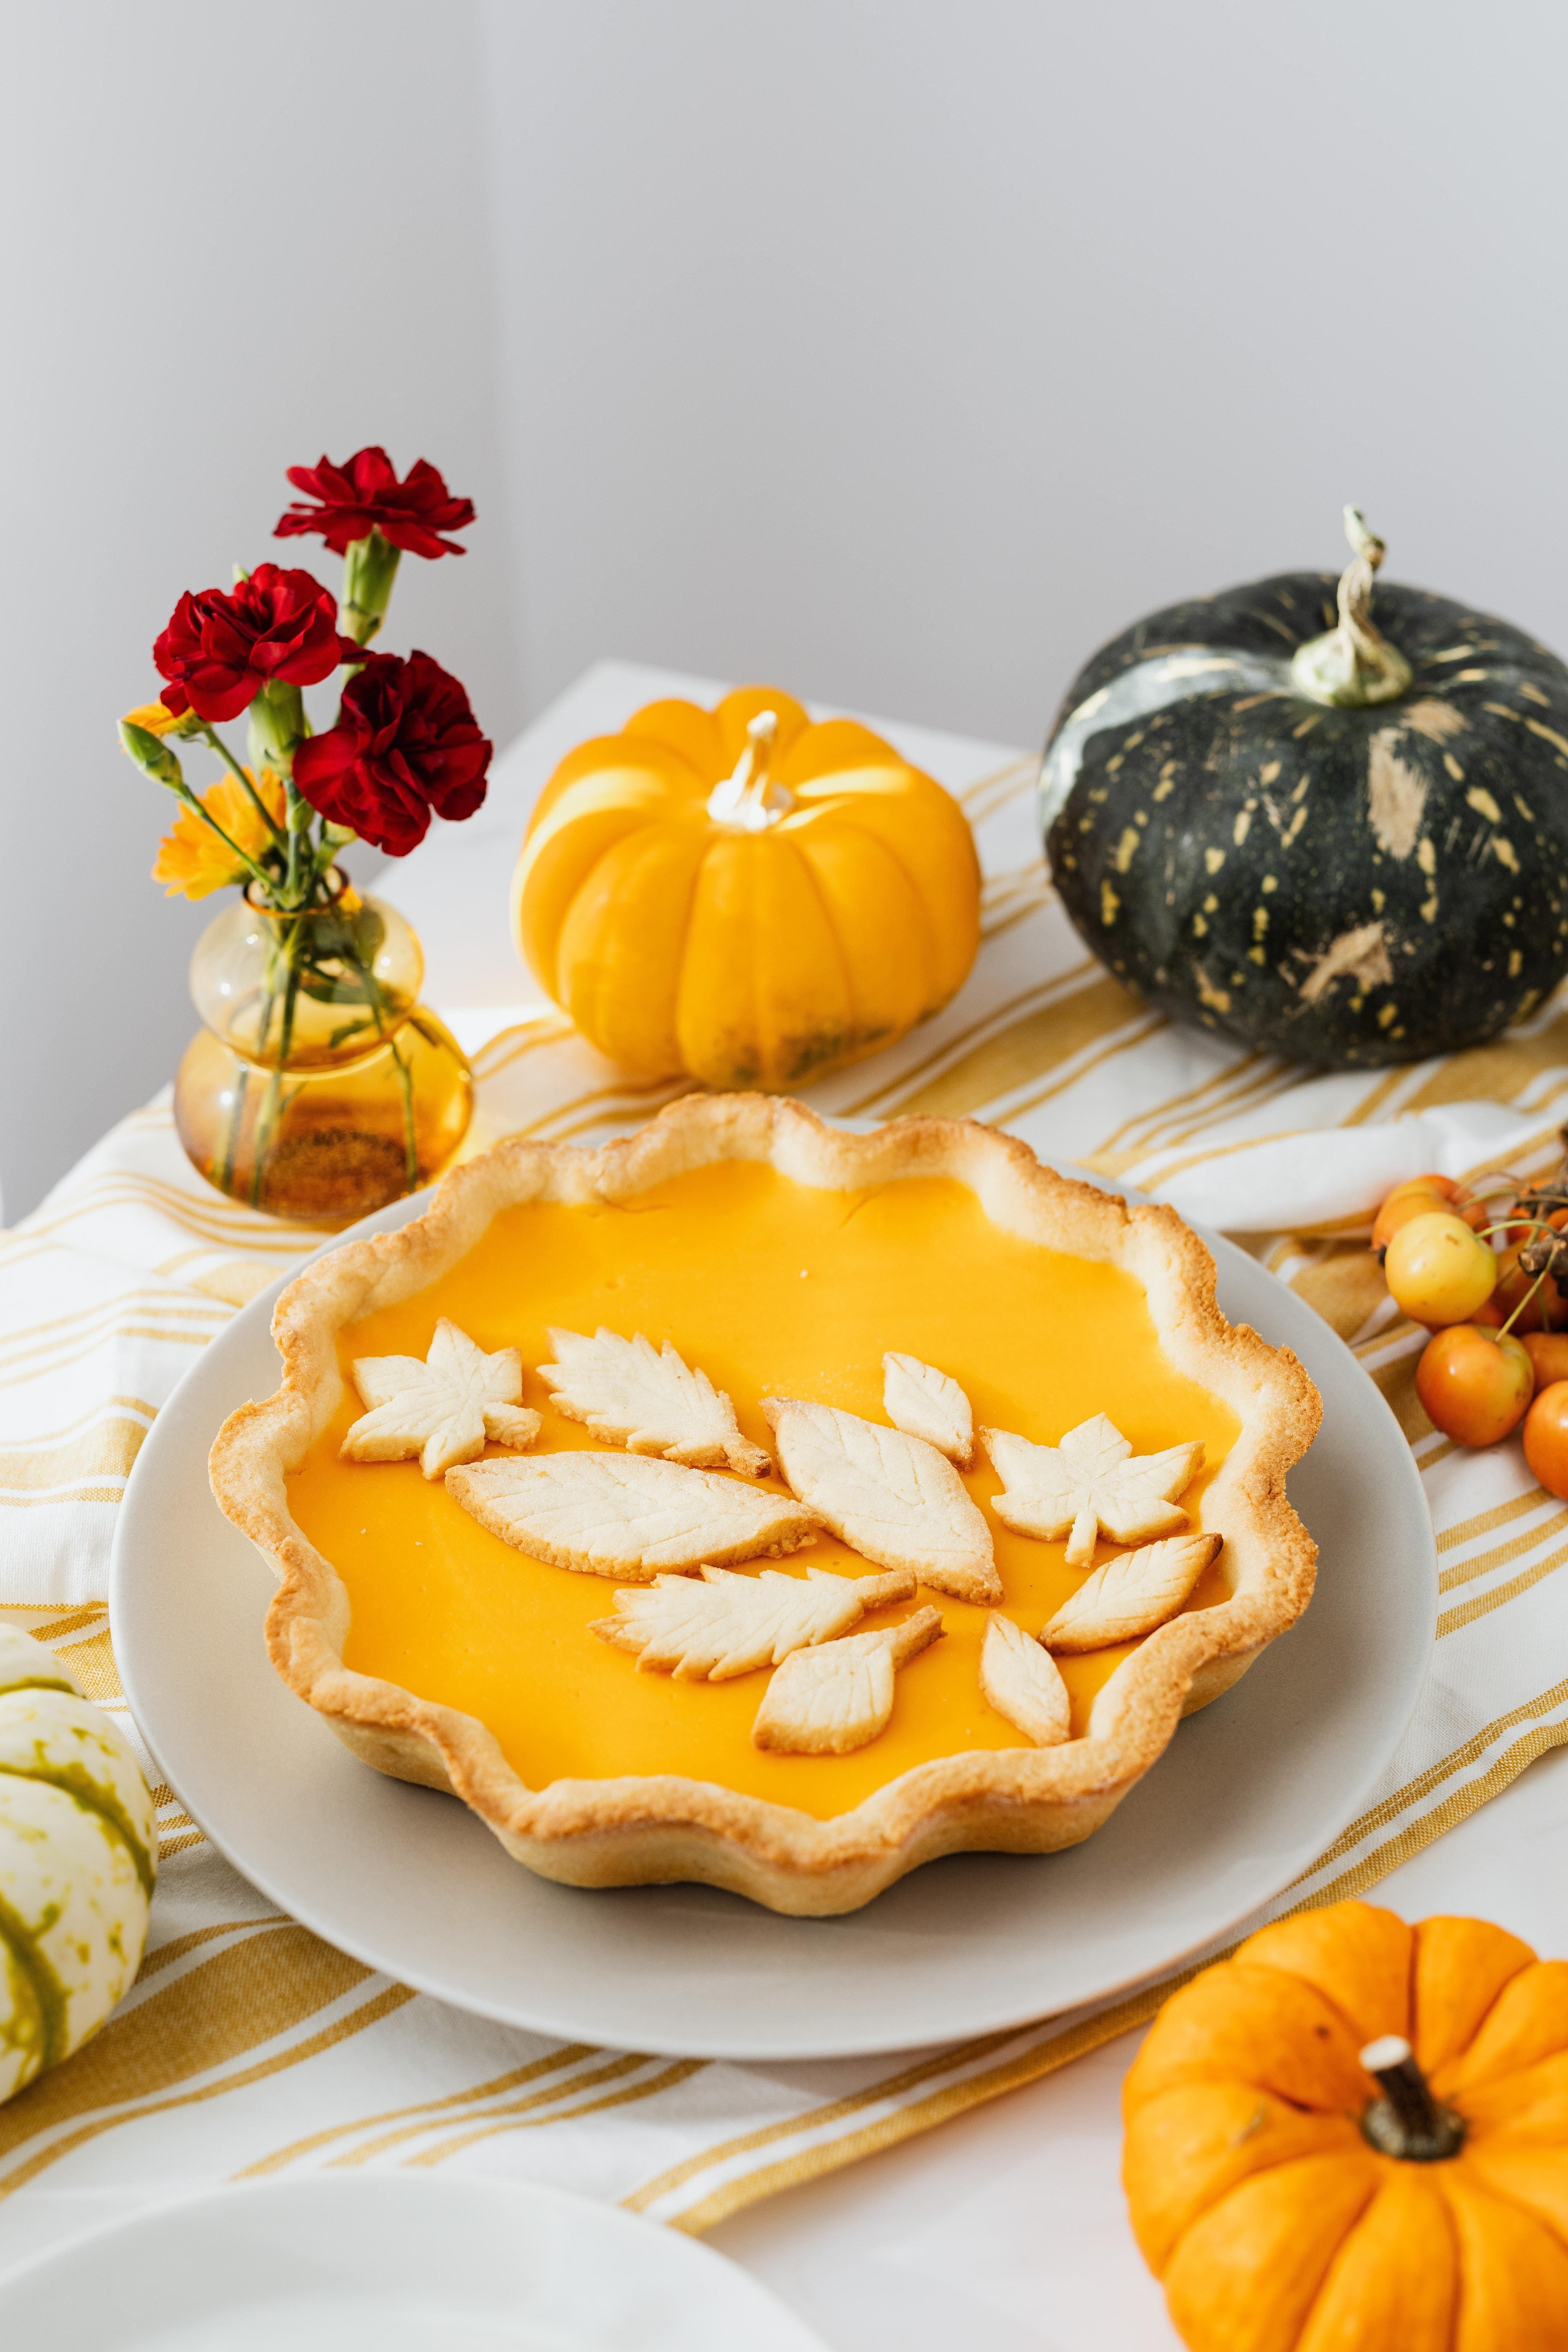 Pumpkin pie on a table with mini pumpkins and a vase of dark red flowers.